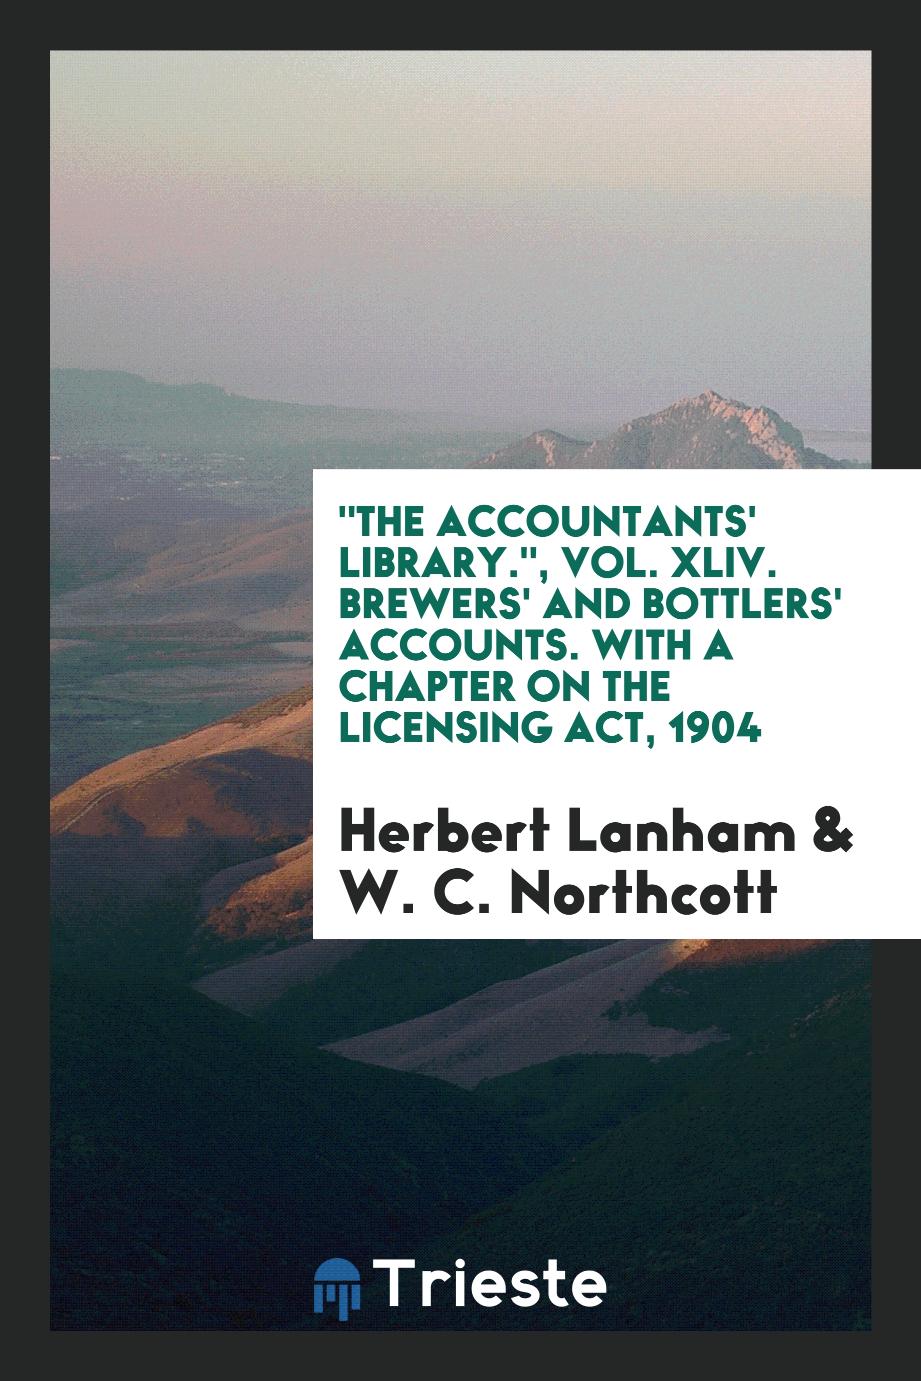 "The Accountants' Library.", Vol. XLIV. Brewers' and Bottlers' Accounts. With a Chapter on the Licensing Act, 1904